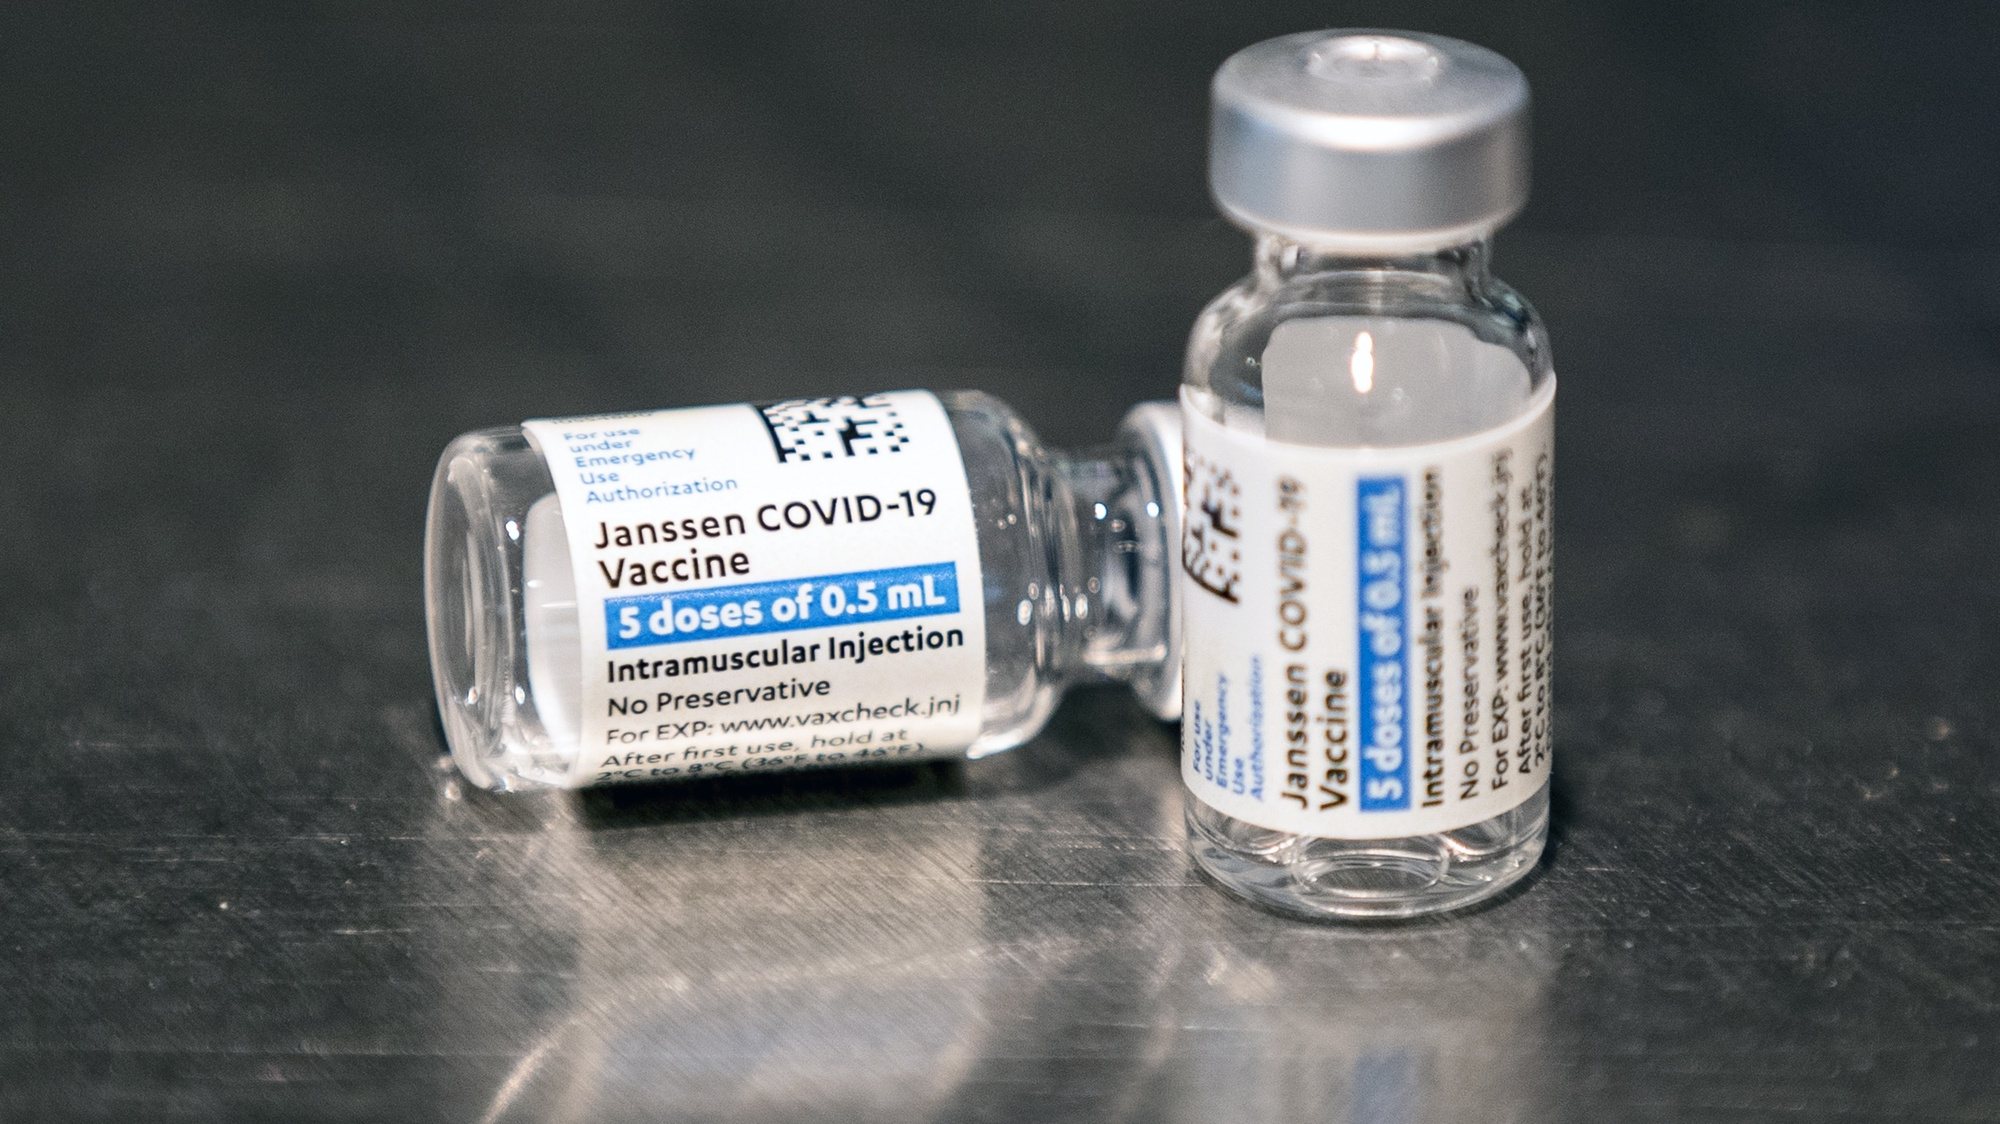 epa09184133 Vials of the Janssen (Pharmaceutical Companies of Johnson &amp; Johnson) vaccine against Covid-19 are displayed during a vaccination operation organized by the Los Angeles Football Club at the Bank of California Stadium in Los Angeles, California, USA, 07 May 2021. Los Angeles Football Club has announced that vaccinated fans will receive a 20% discount on merchandise at the LAFC team store.  EPA/ETIENNE LAURENT